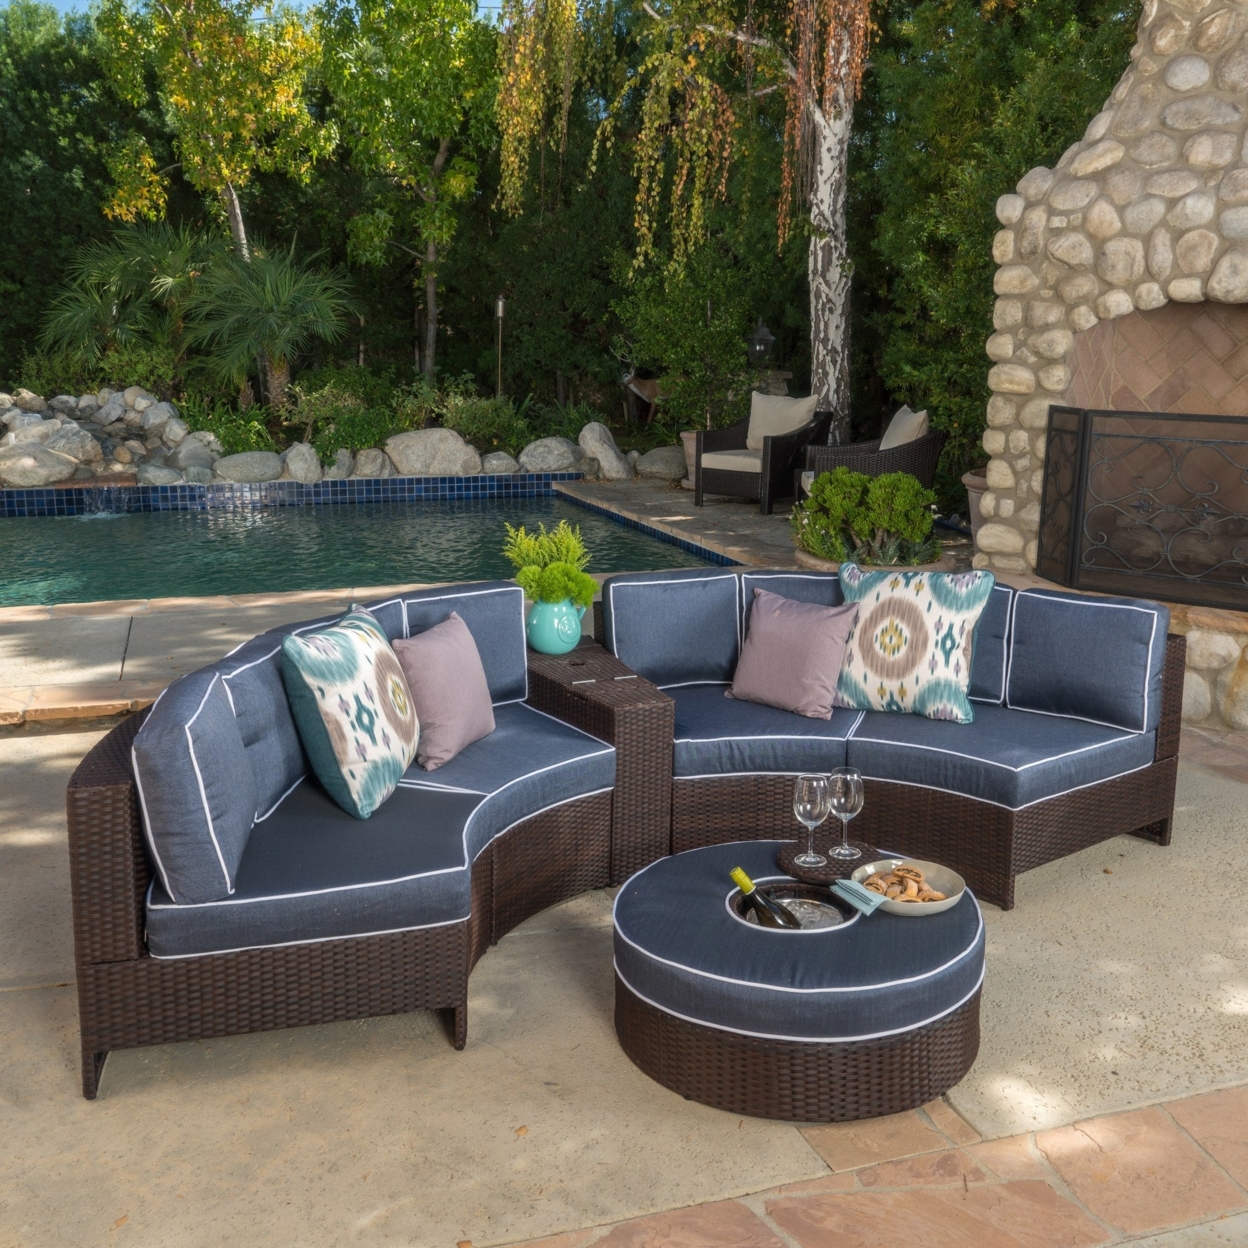 Riviera 6pc Outdoor Sectional Sofa Set With Storage Trunk & Ice Bucket - Blue